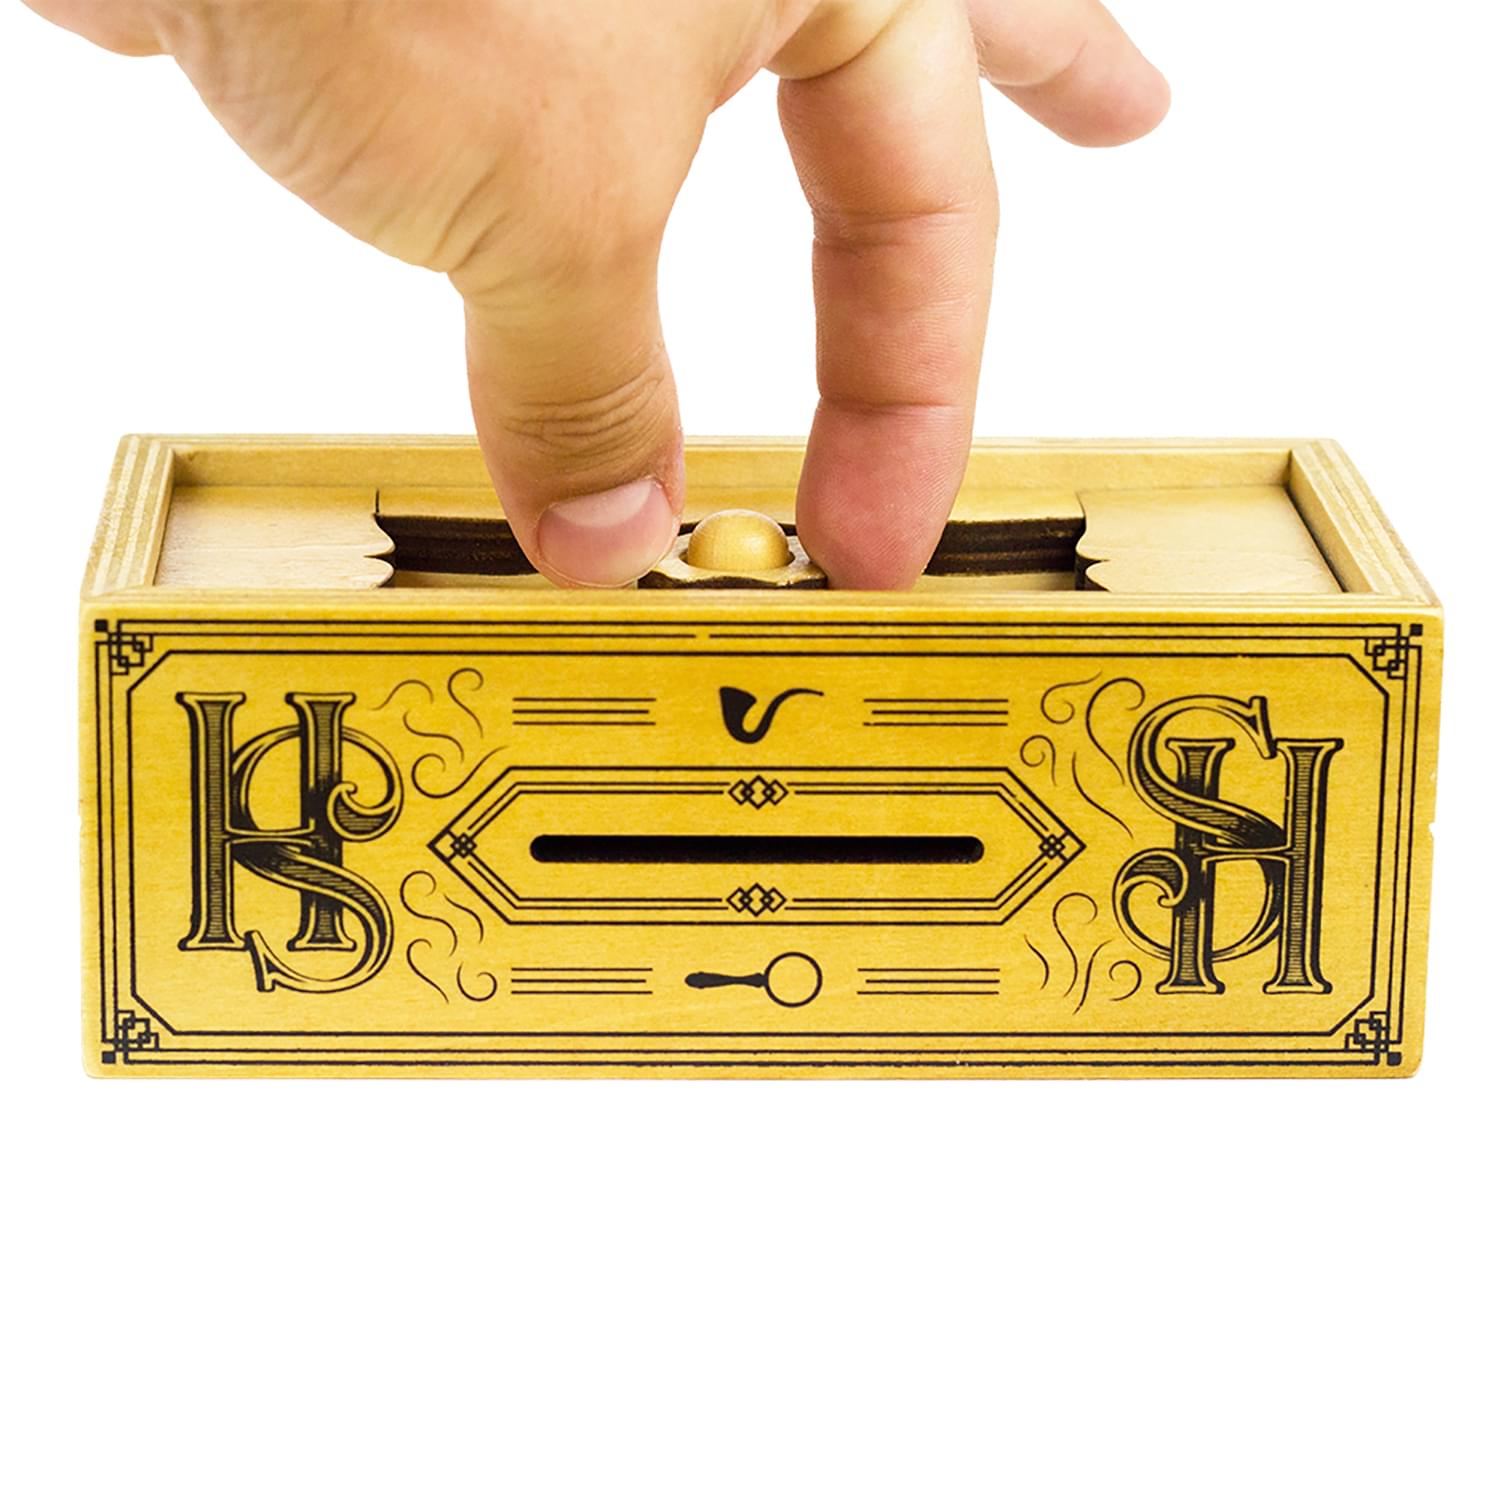 Sherlock Holmes The Case of the Treasury Safe 3D Brain Teaser Puzzle